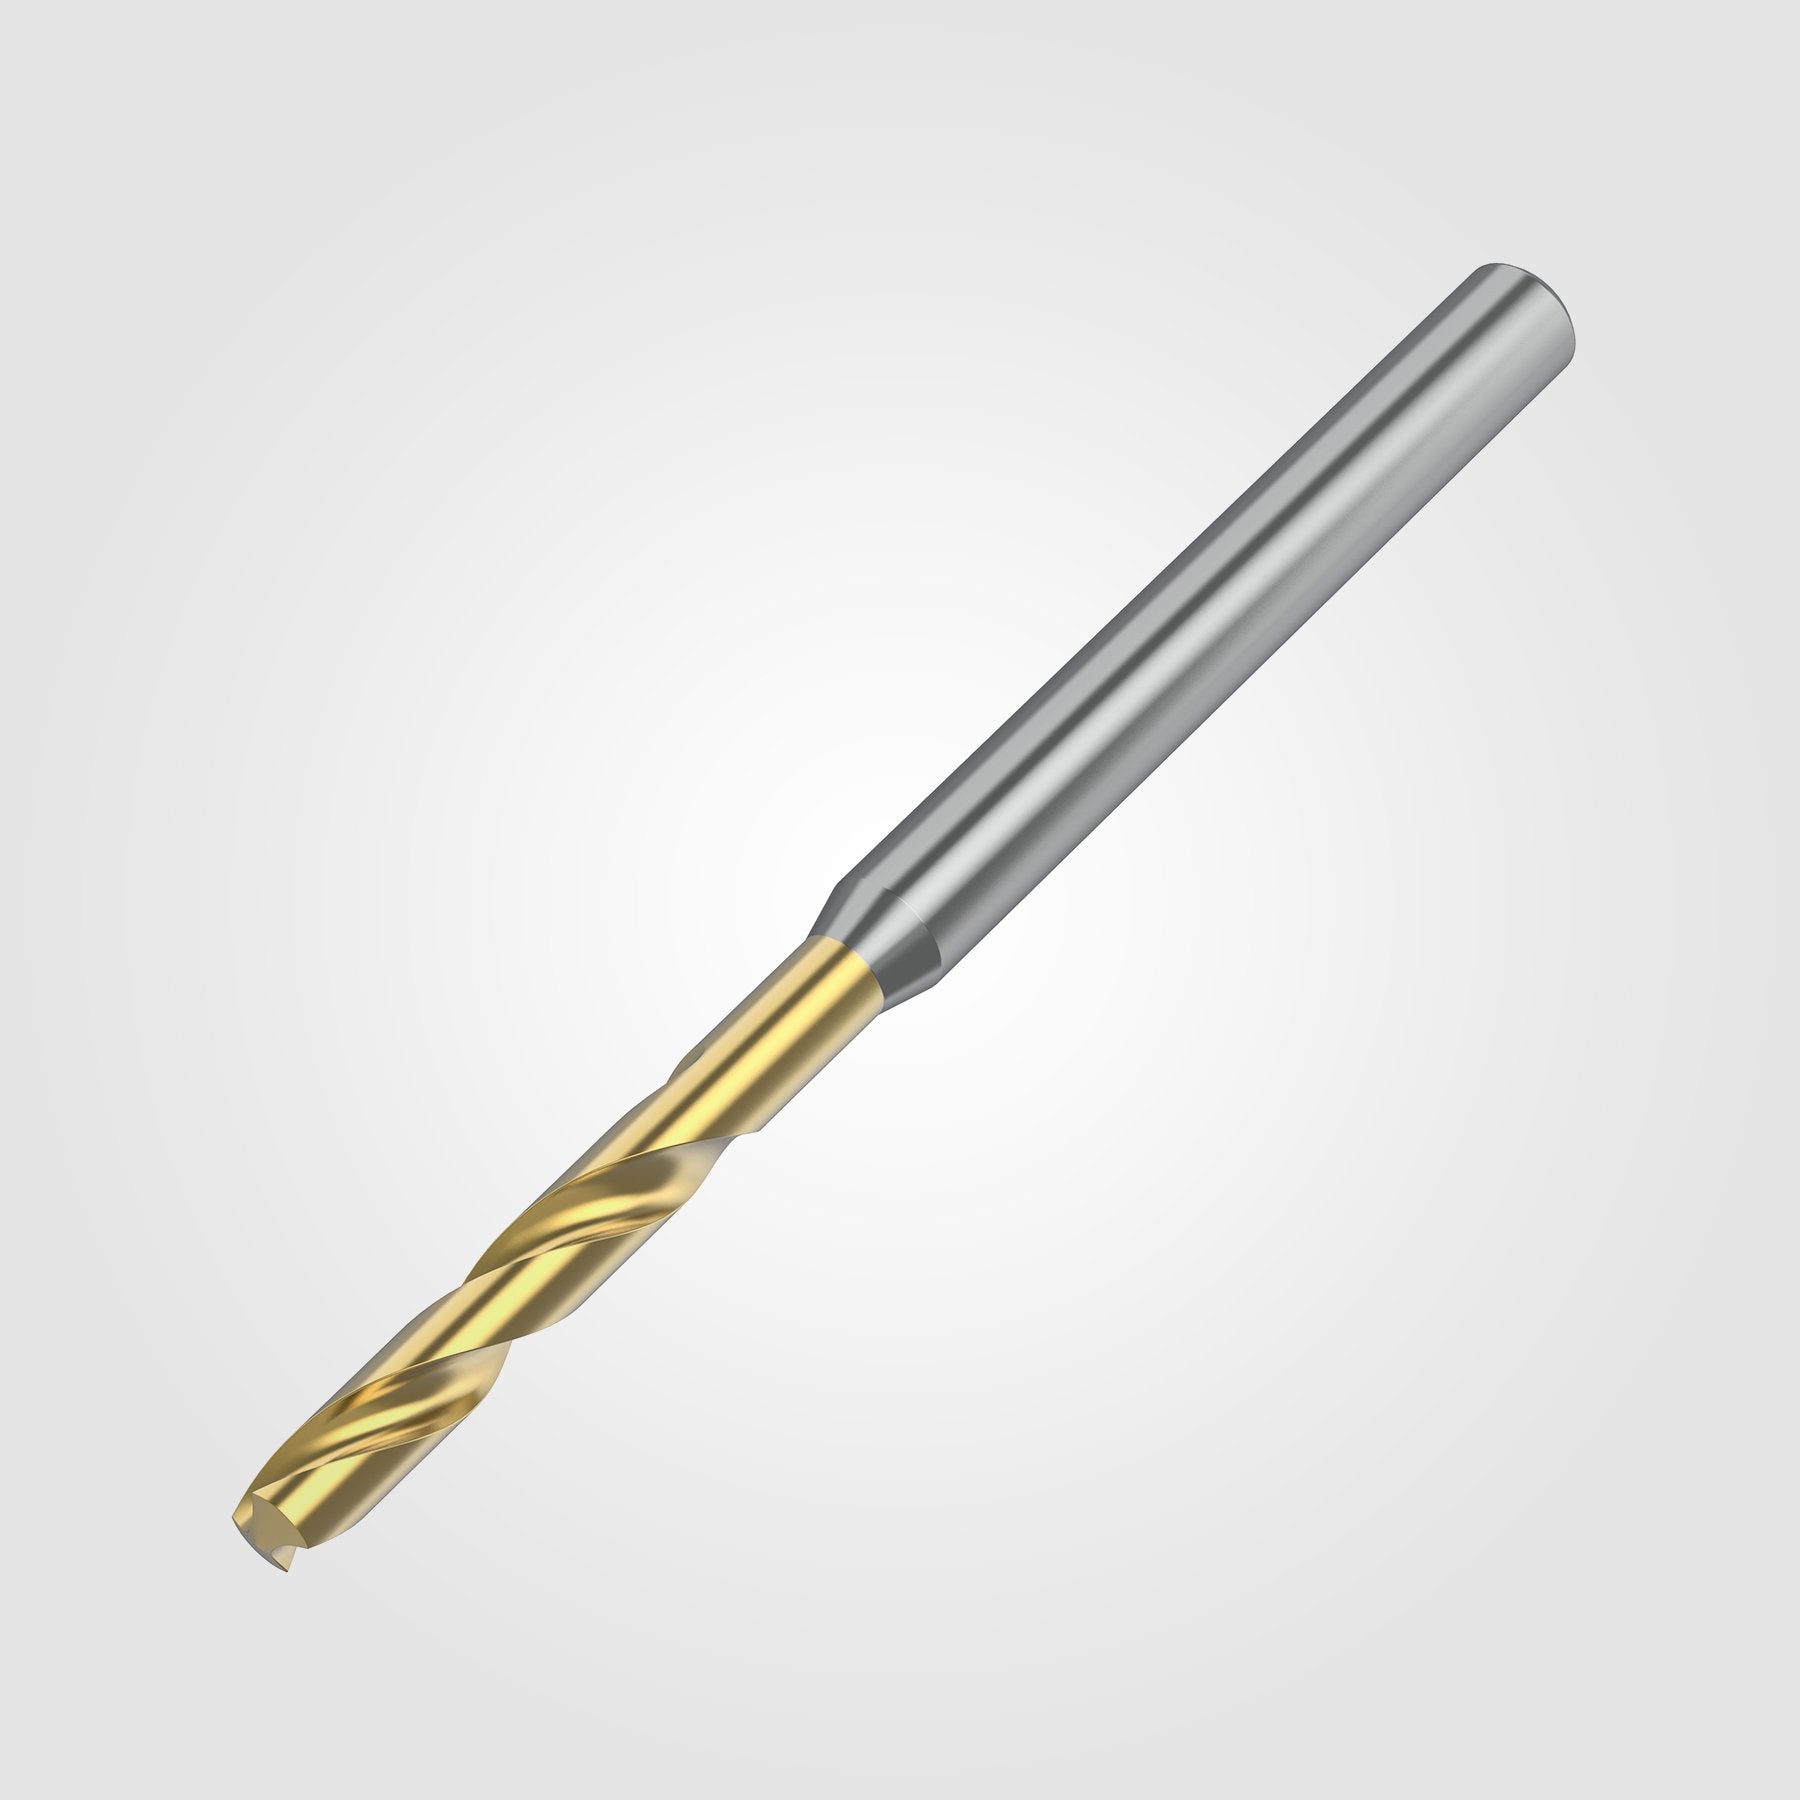 GOdrill (THROUGH COOLANT) | 17.9mm / .7047" / 3xD | SOLID CARBIDE DRILL | 4151299